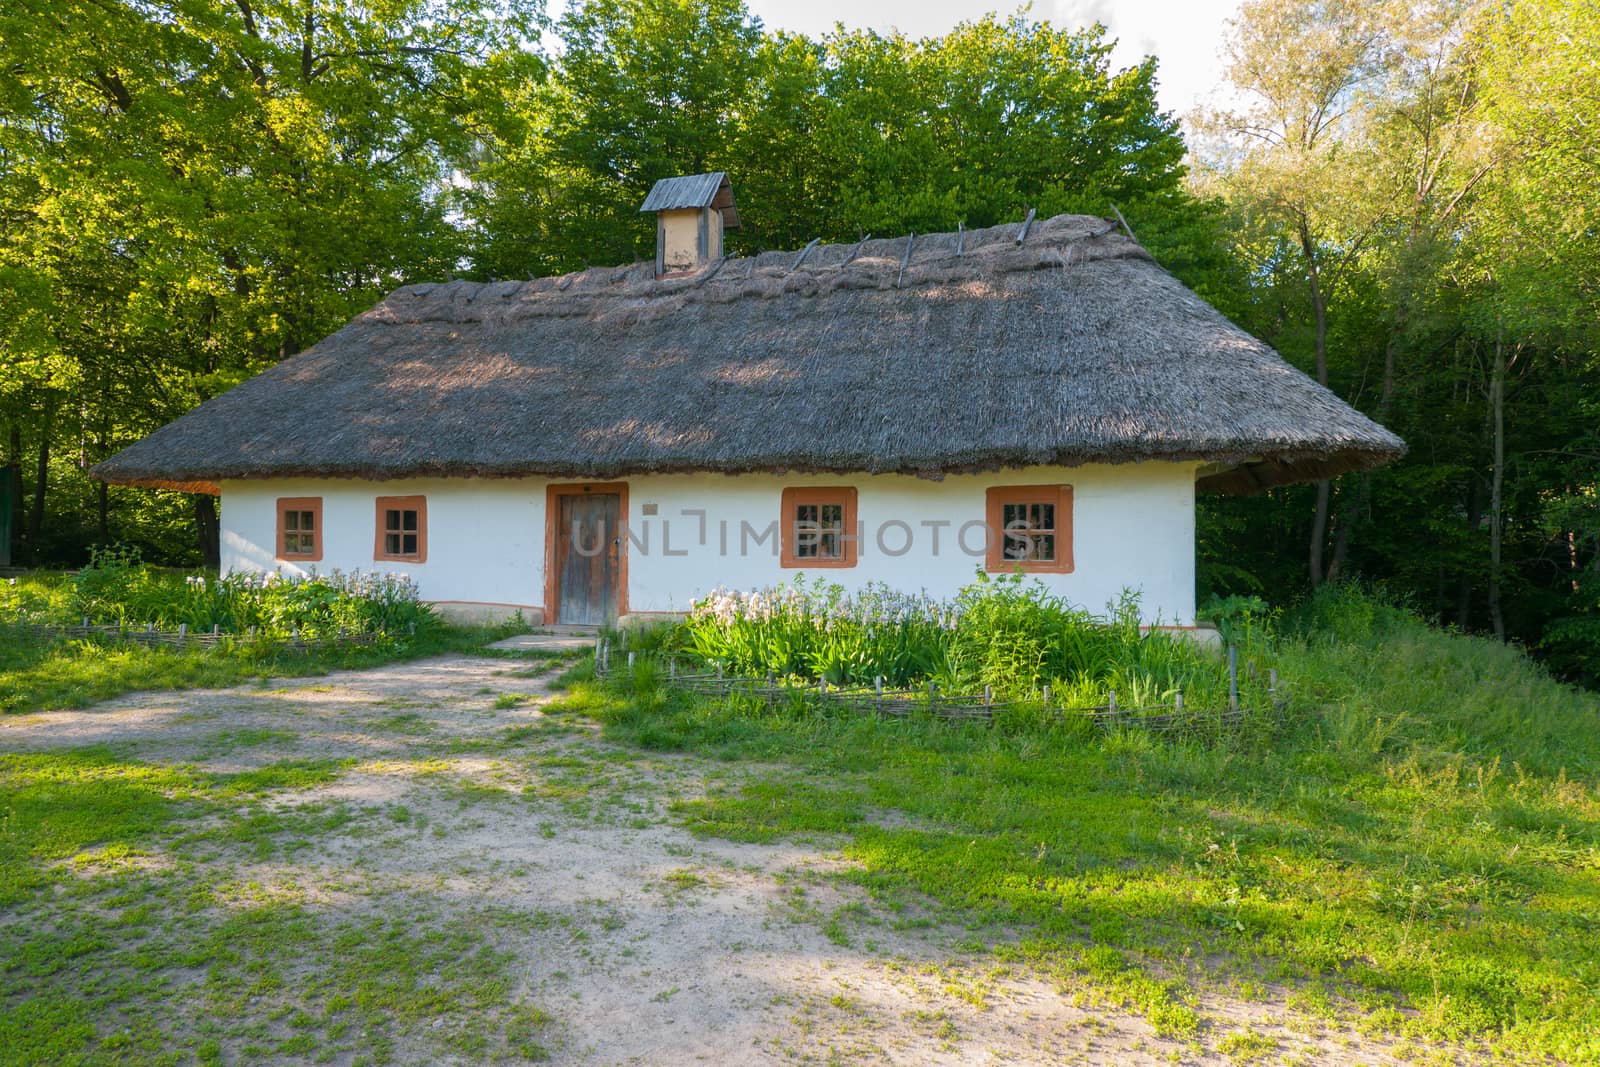 An old authentic Ukrainian hut with white walls and a thatched roof against the backdrop of a green garden